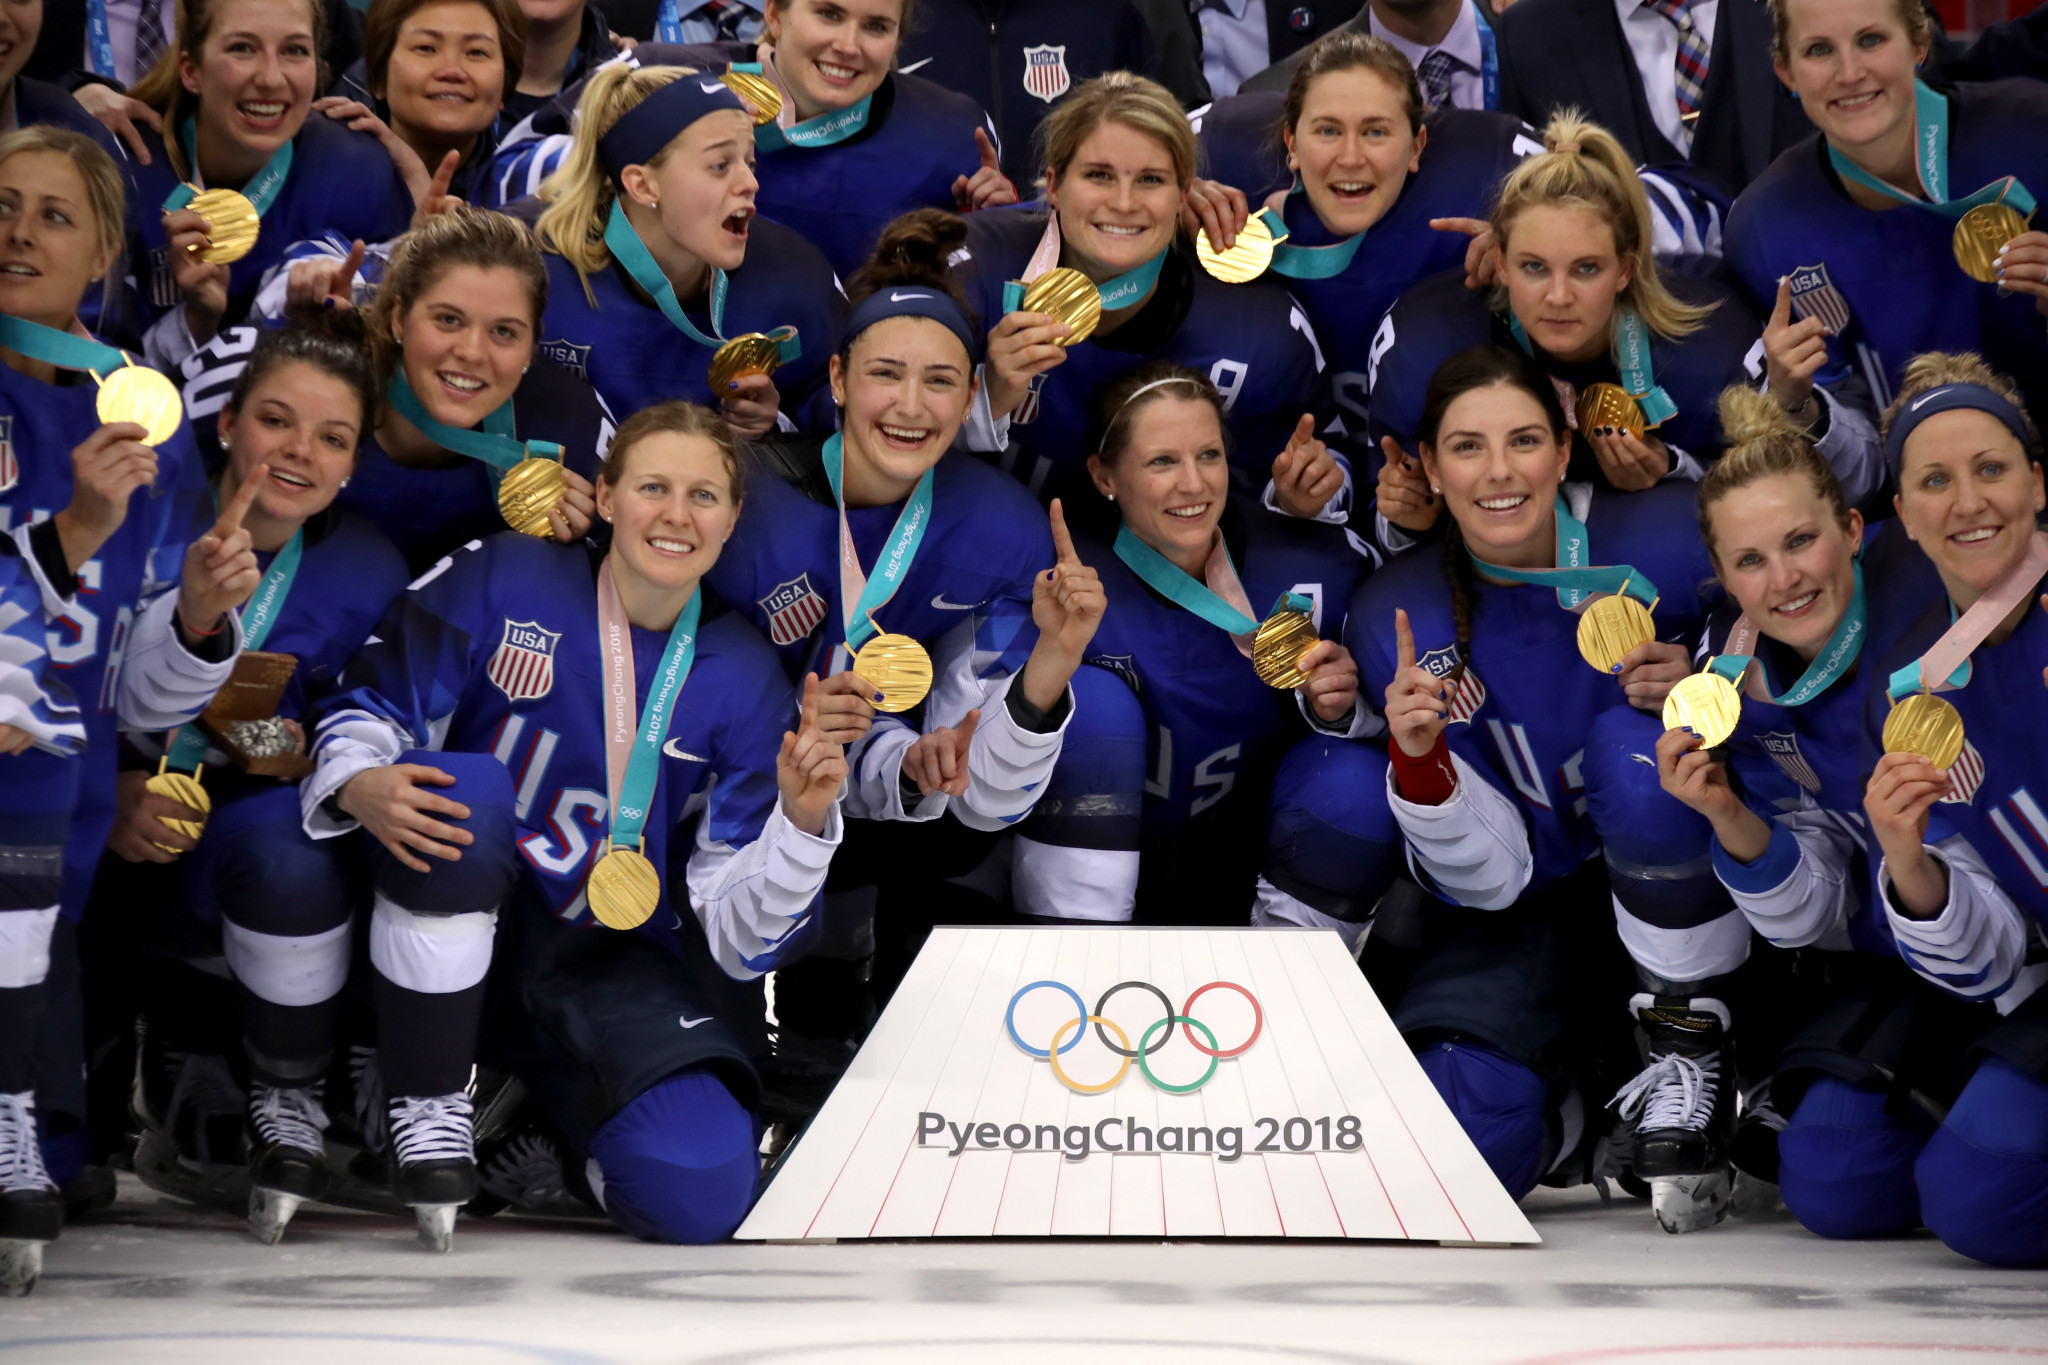 The United States had not won the women's ice hockey gold medal since the inaugural tournament at Nagano 1998 ©Getty Images